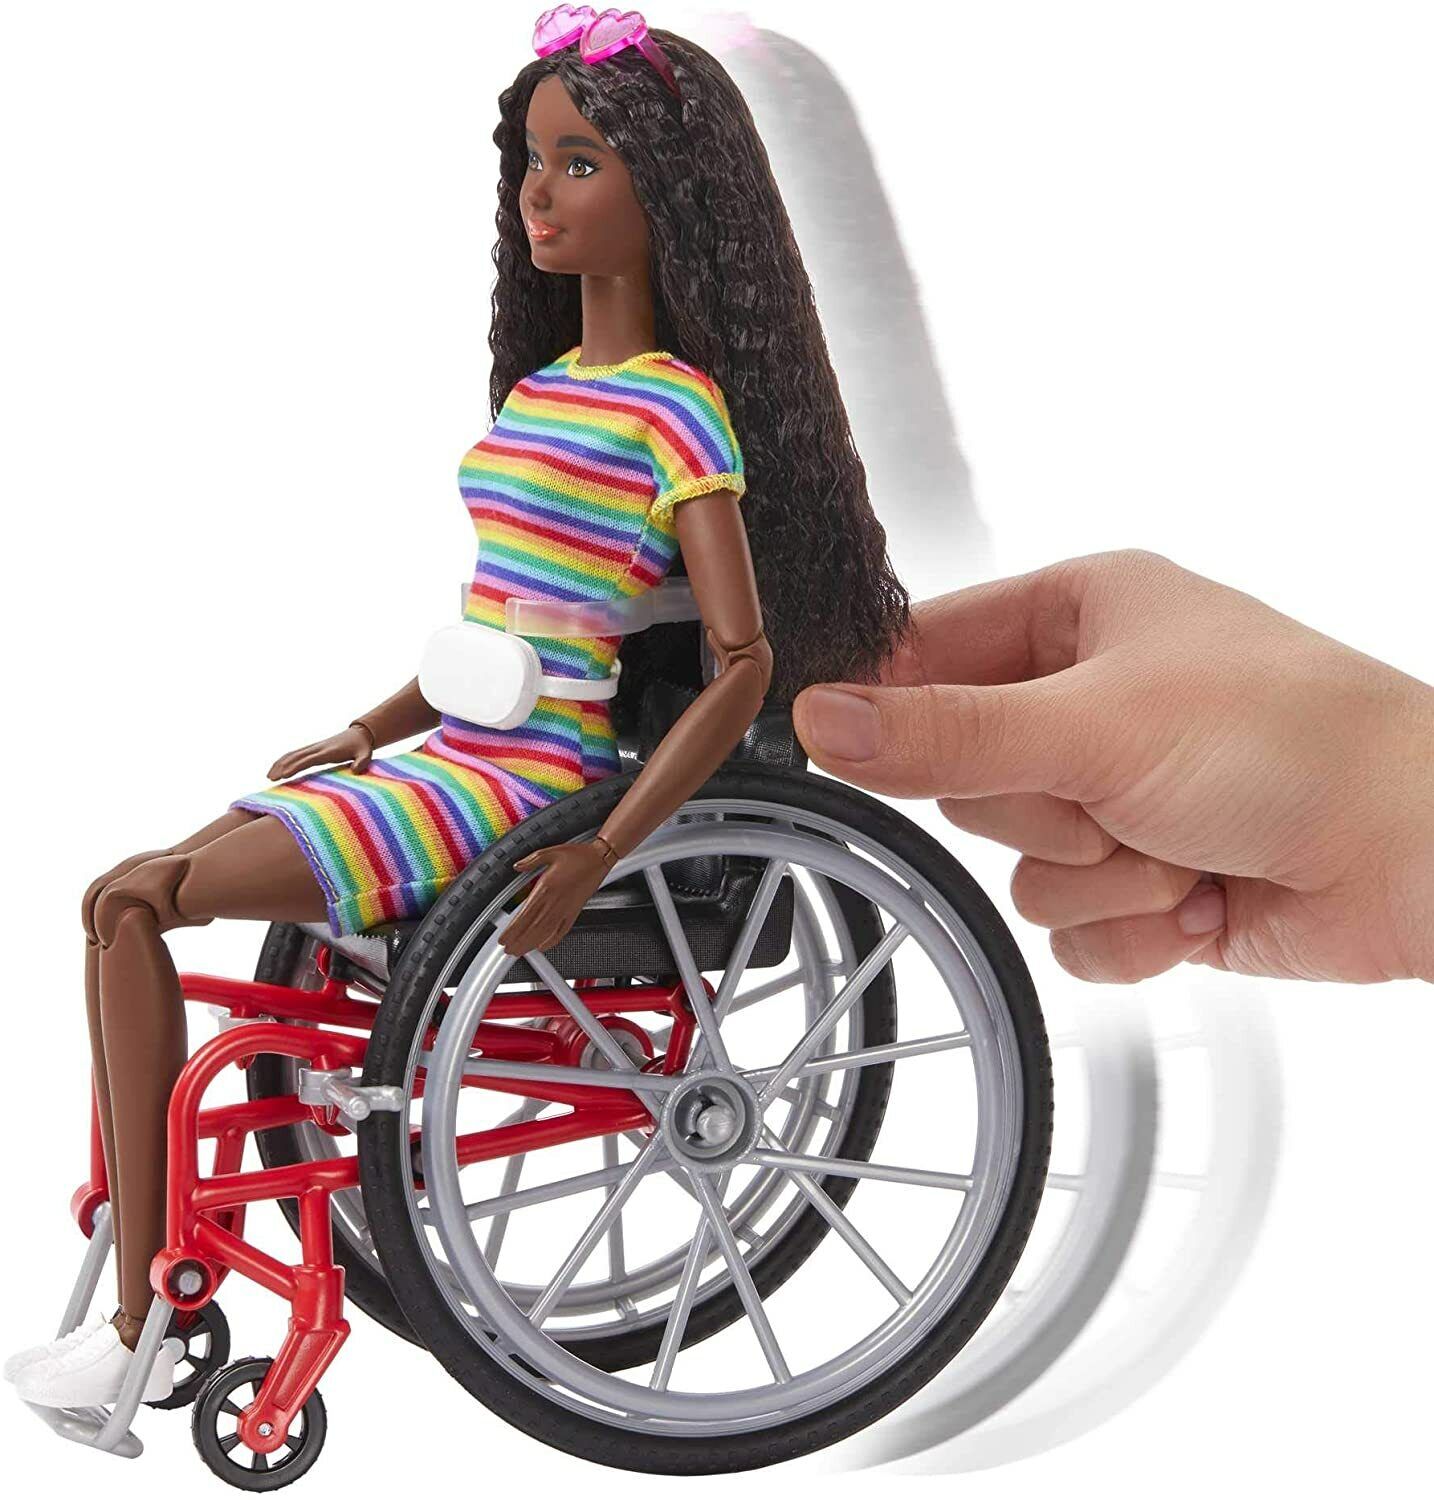 New Barbie Fashionistas Doll #166 with Wheelchair - Crimped Brunette Hair